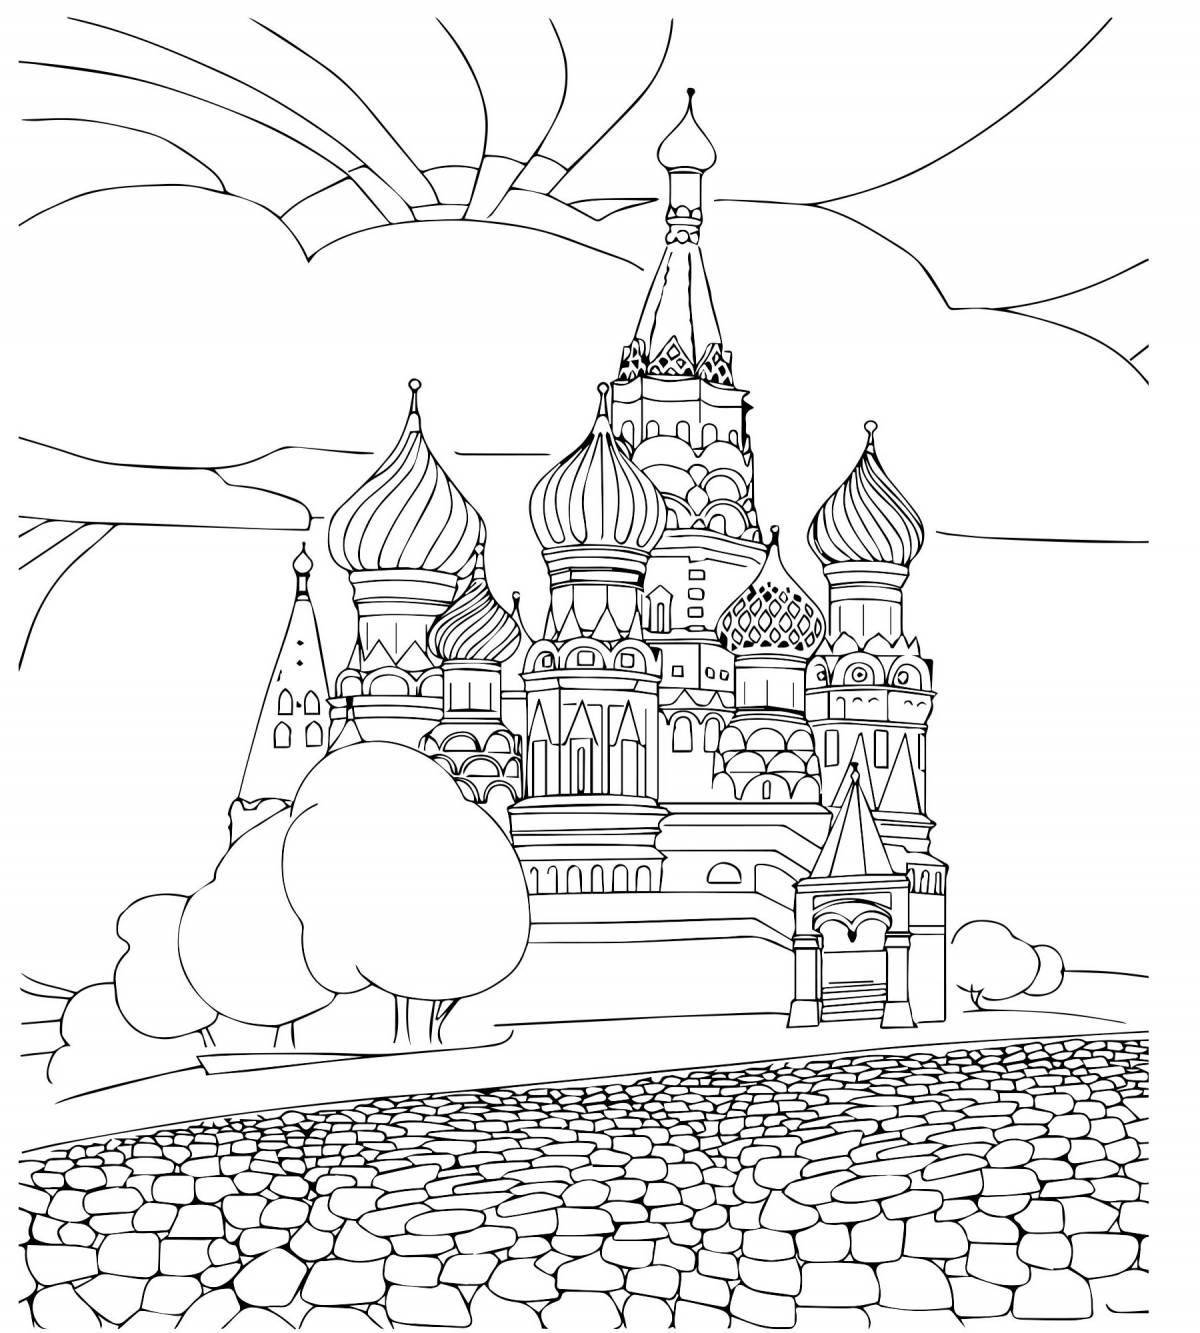 Exciting Moscow coloring book for grade 1